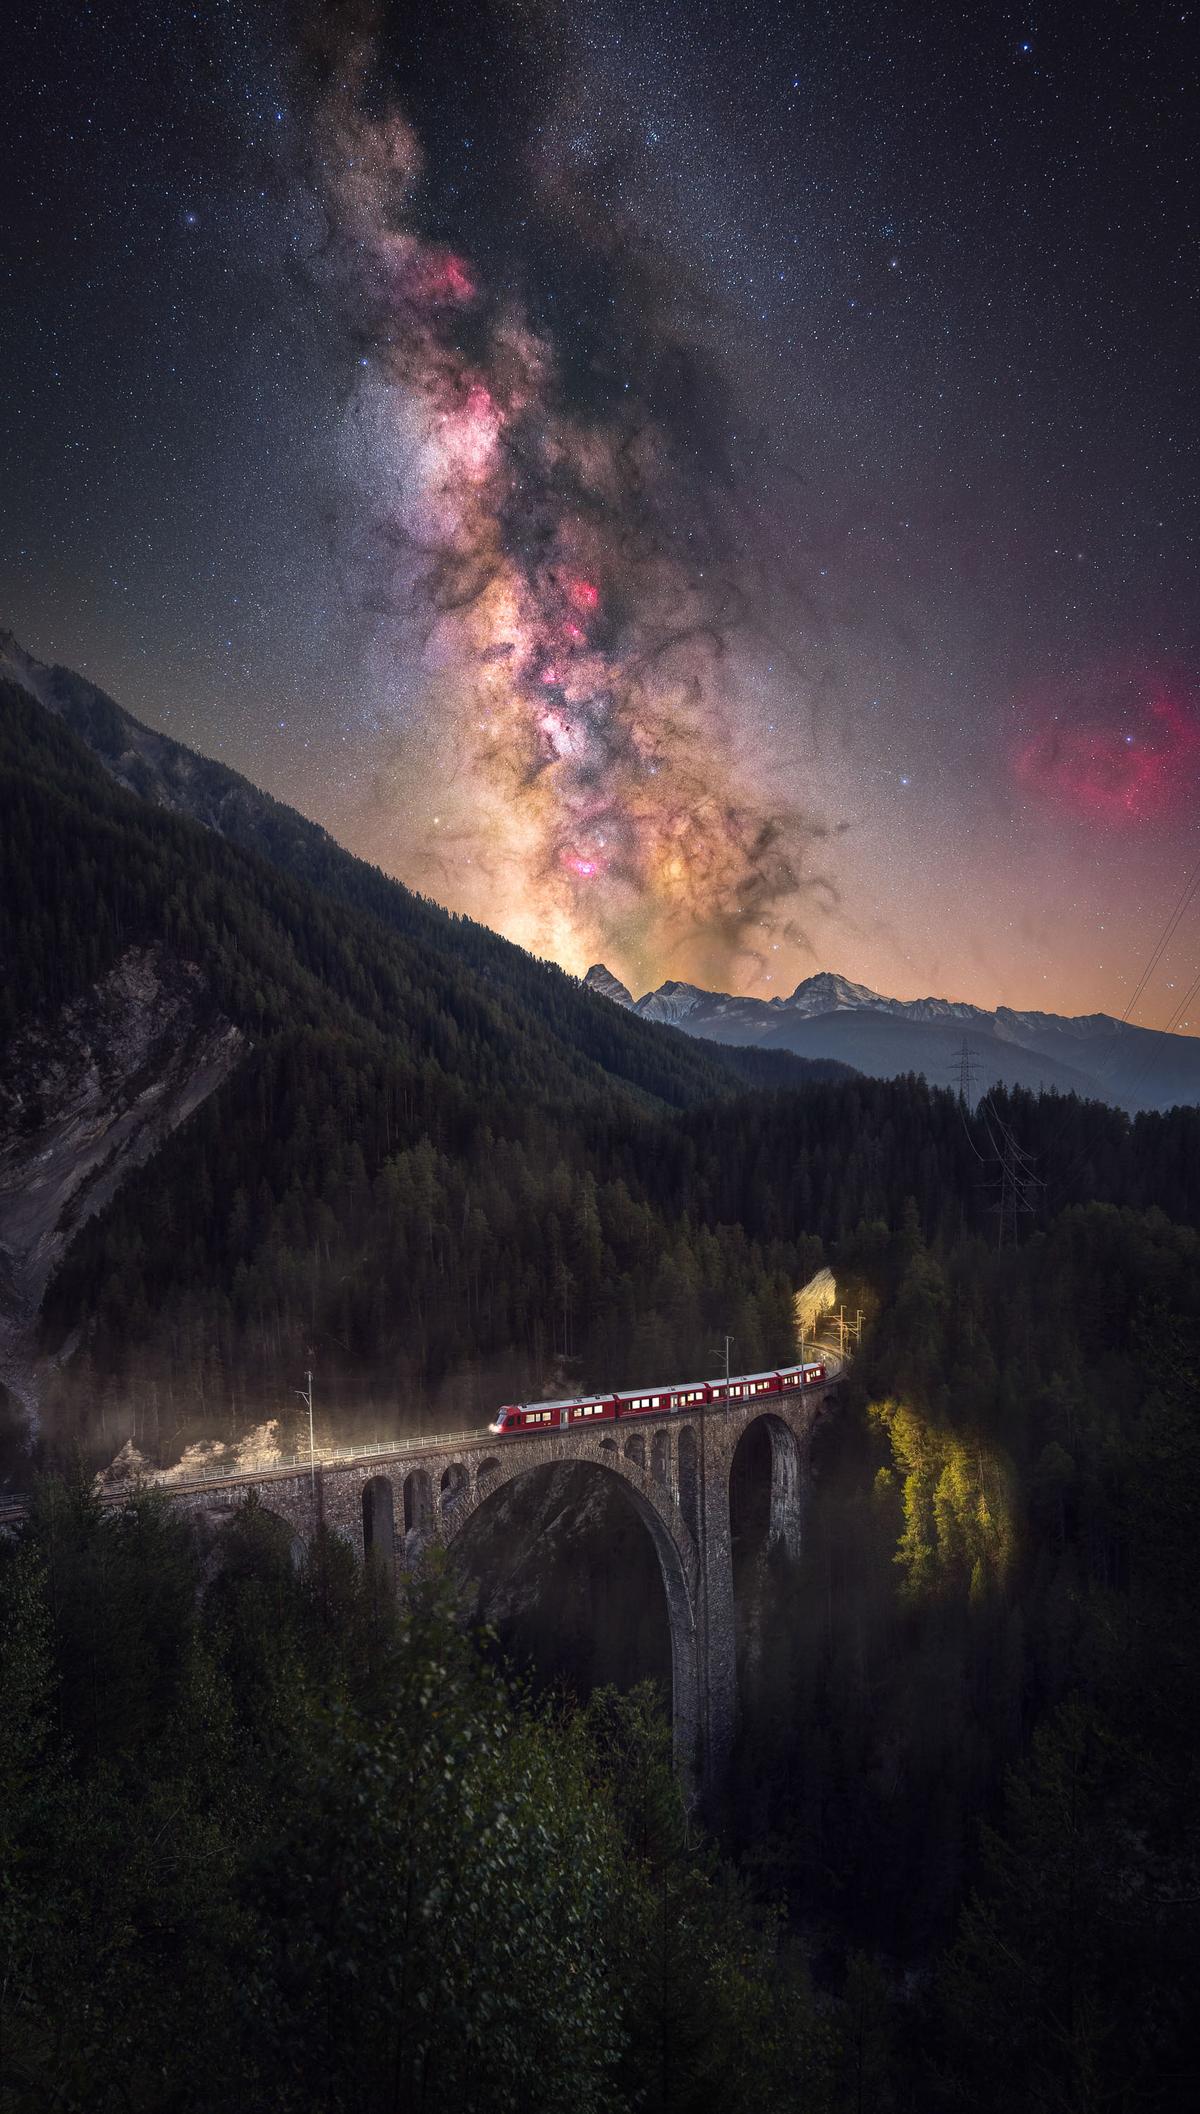 “The Night Train” by Alexander Forst. (Courtesy of Alexander Forst)